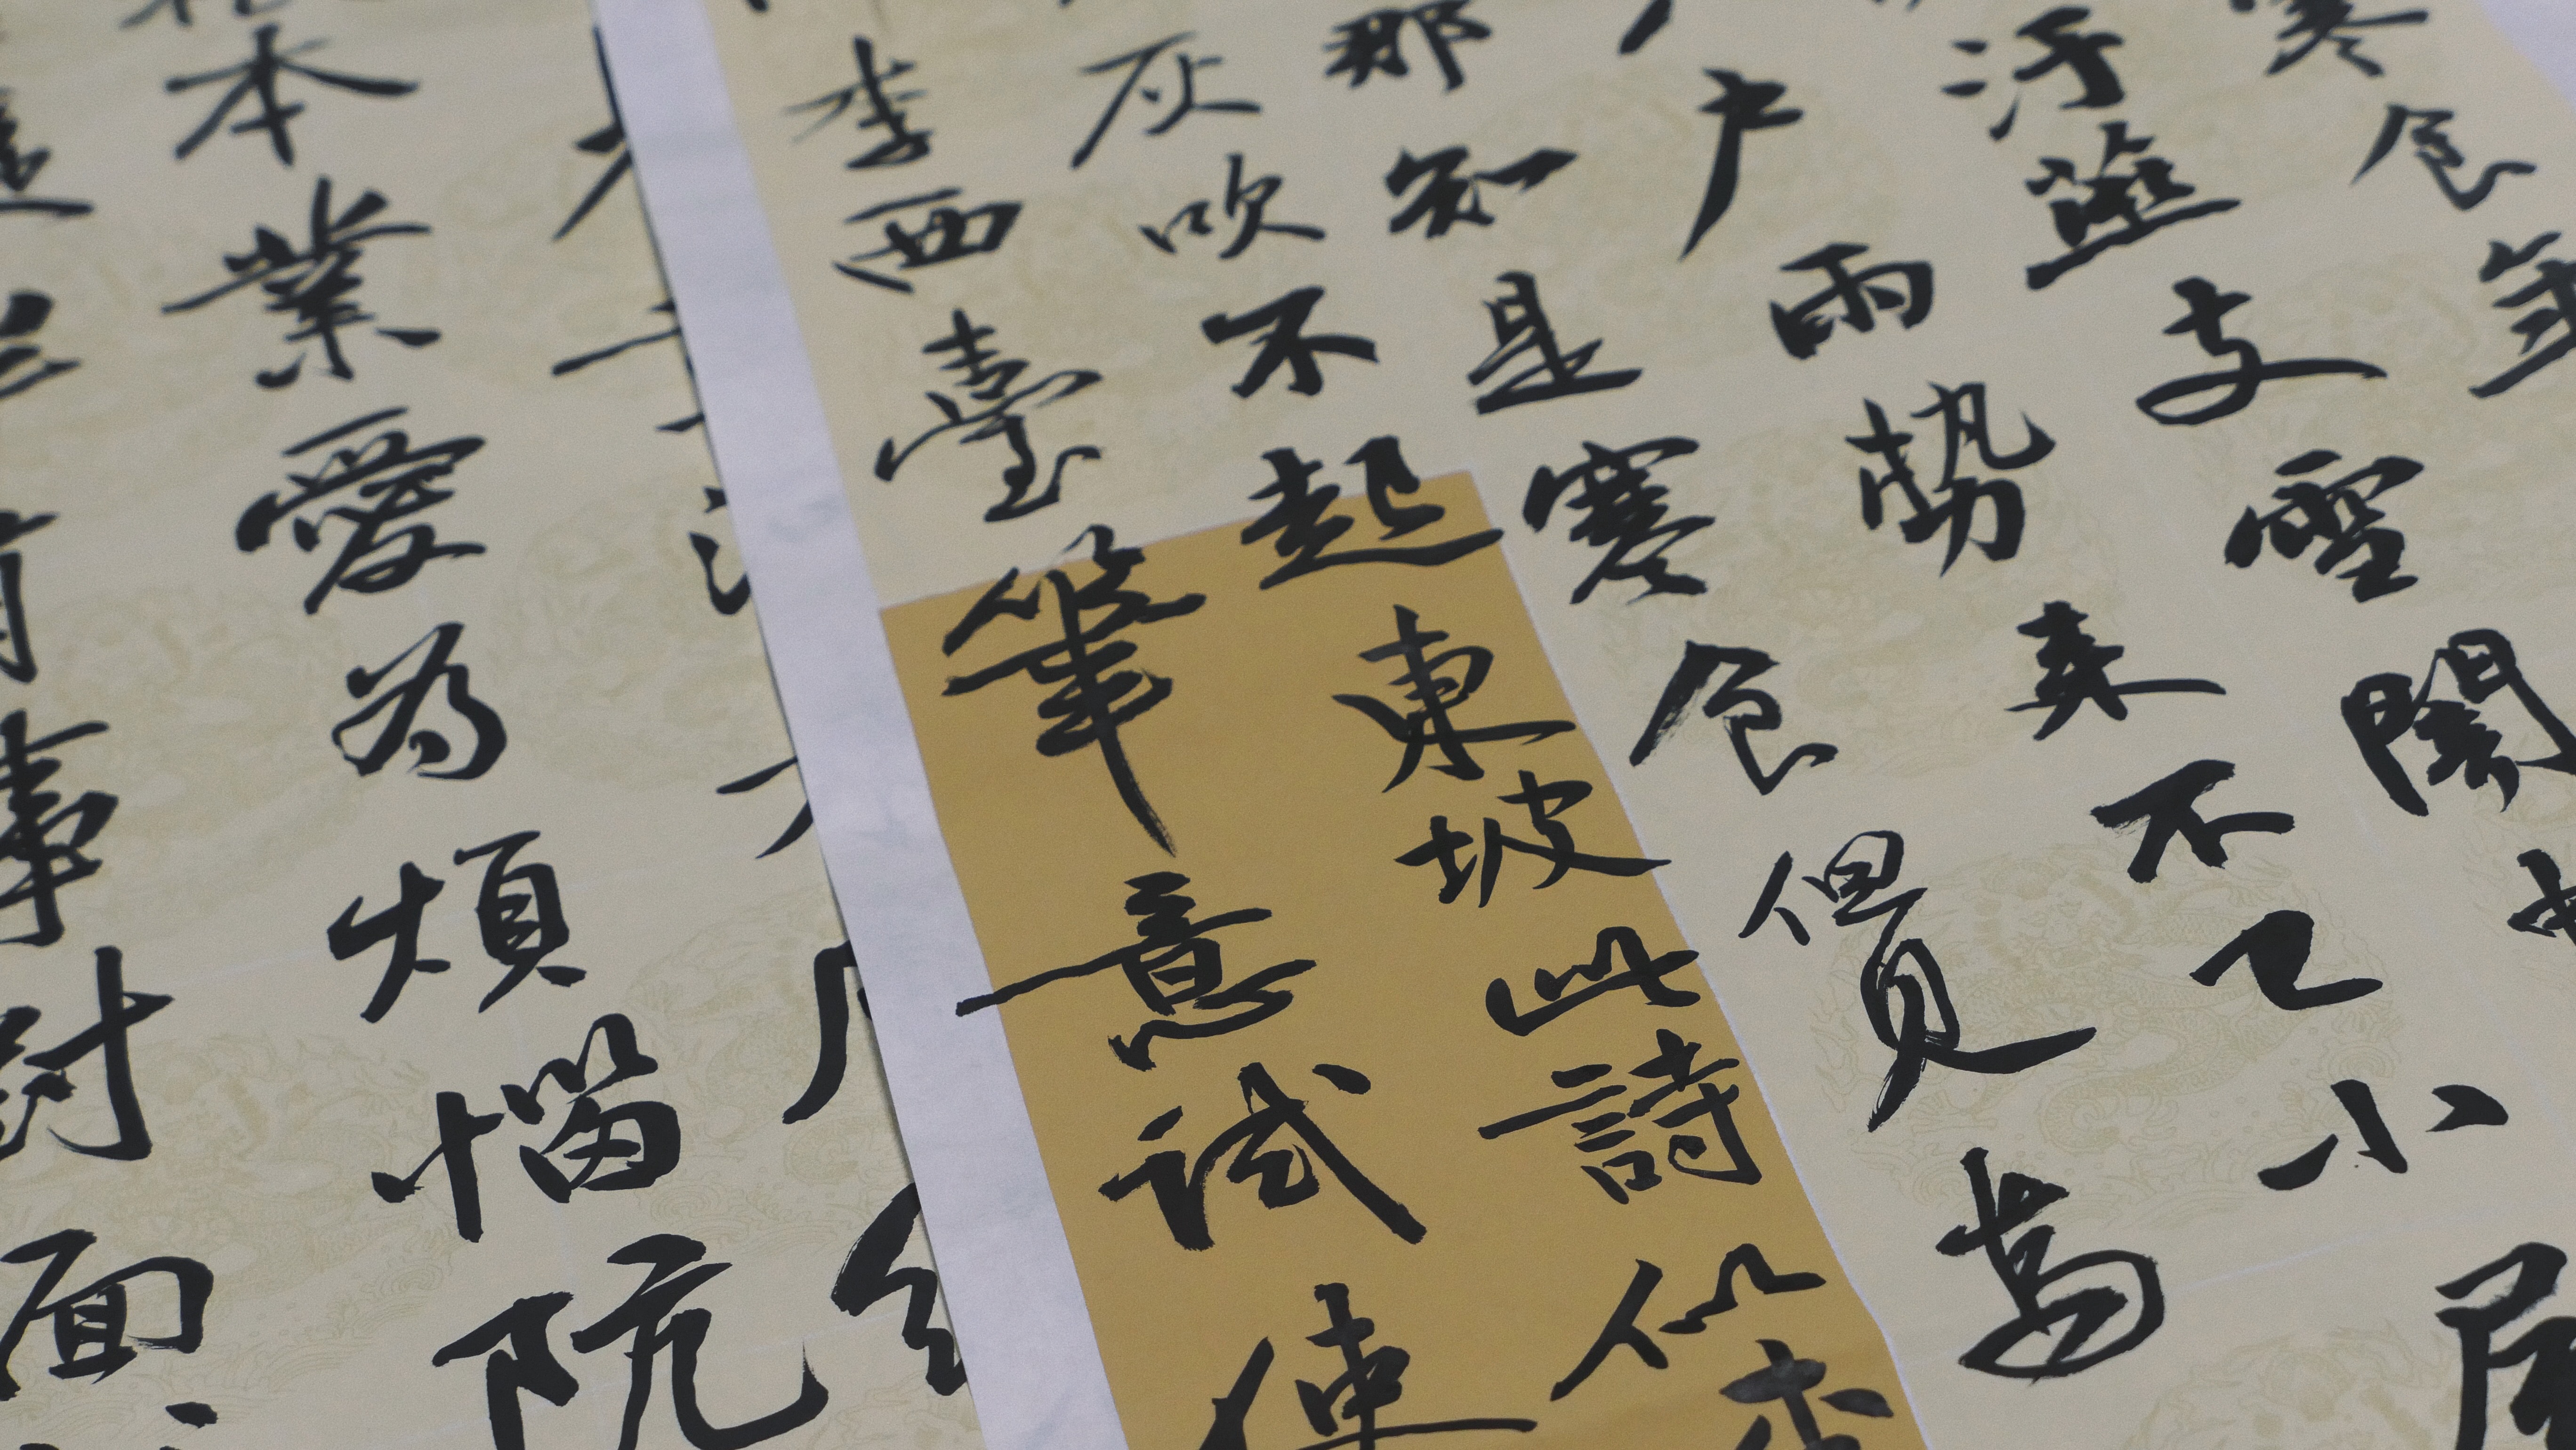 Chinese letters thinly painted on paper